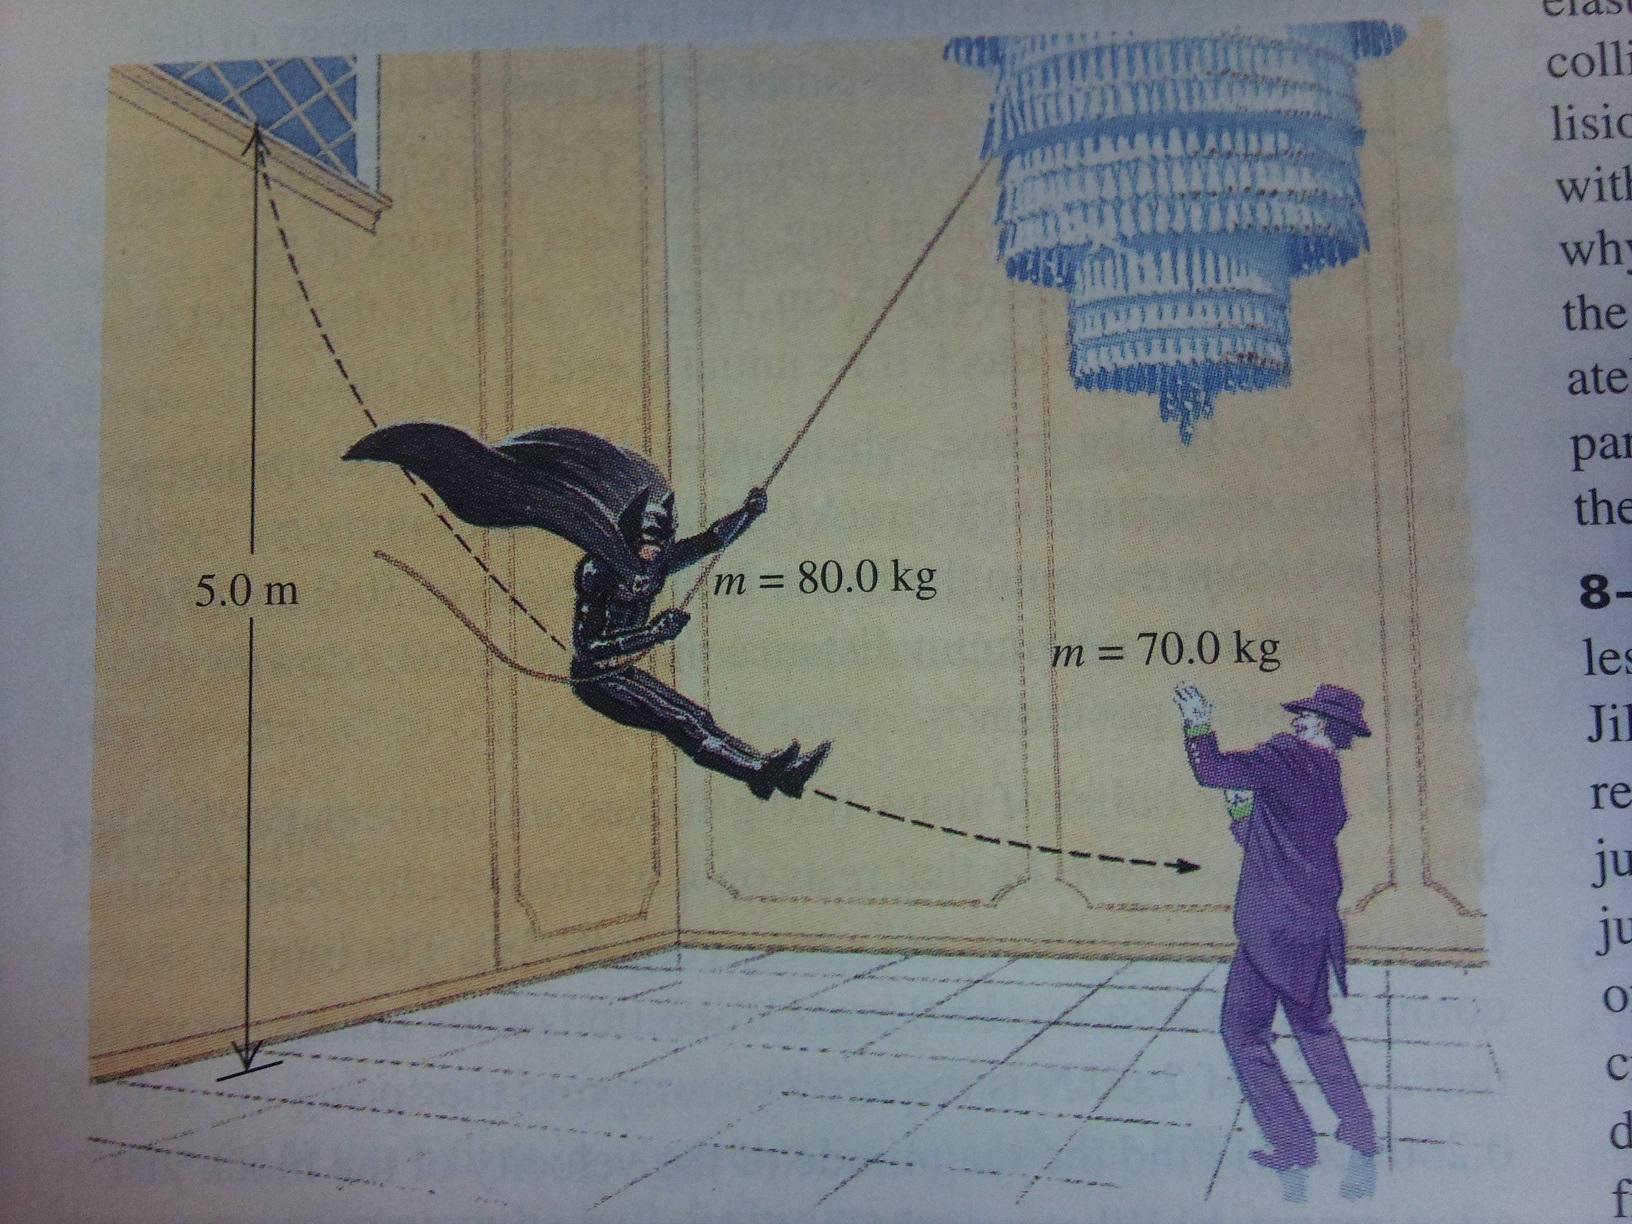 Found this in my physics text book.